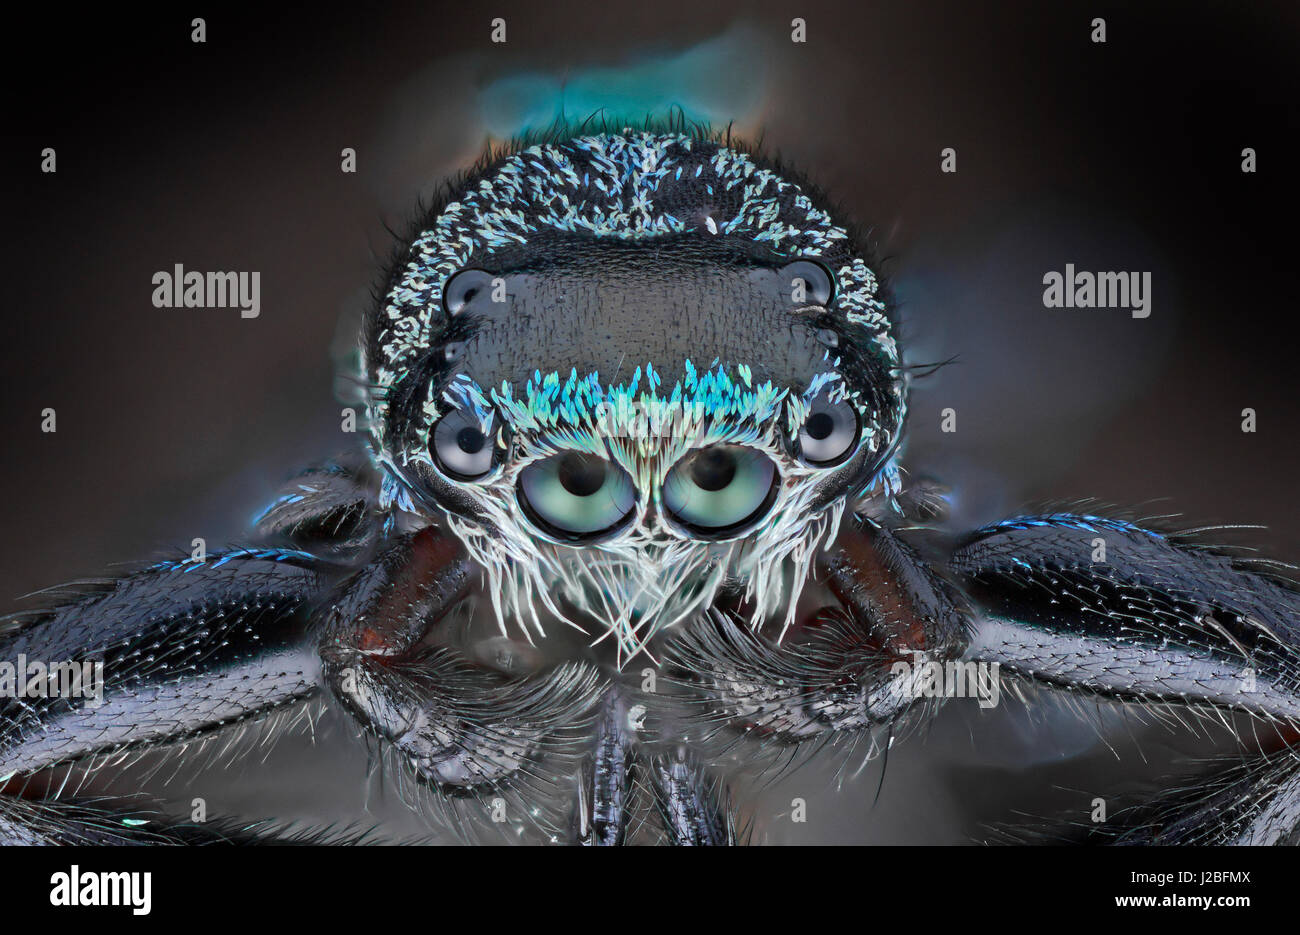 Malaysia jumping spider, Salticidae, high macro 'stacked' image, irridescent like scales Stock Photo